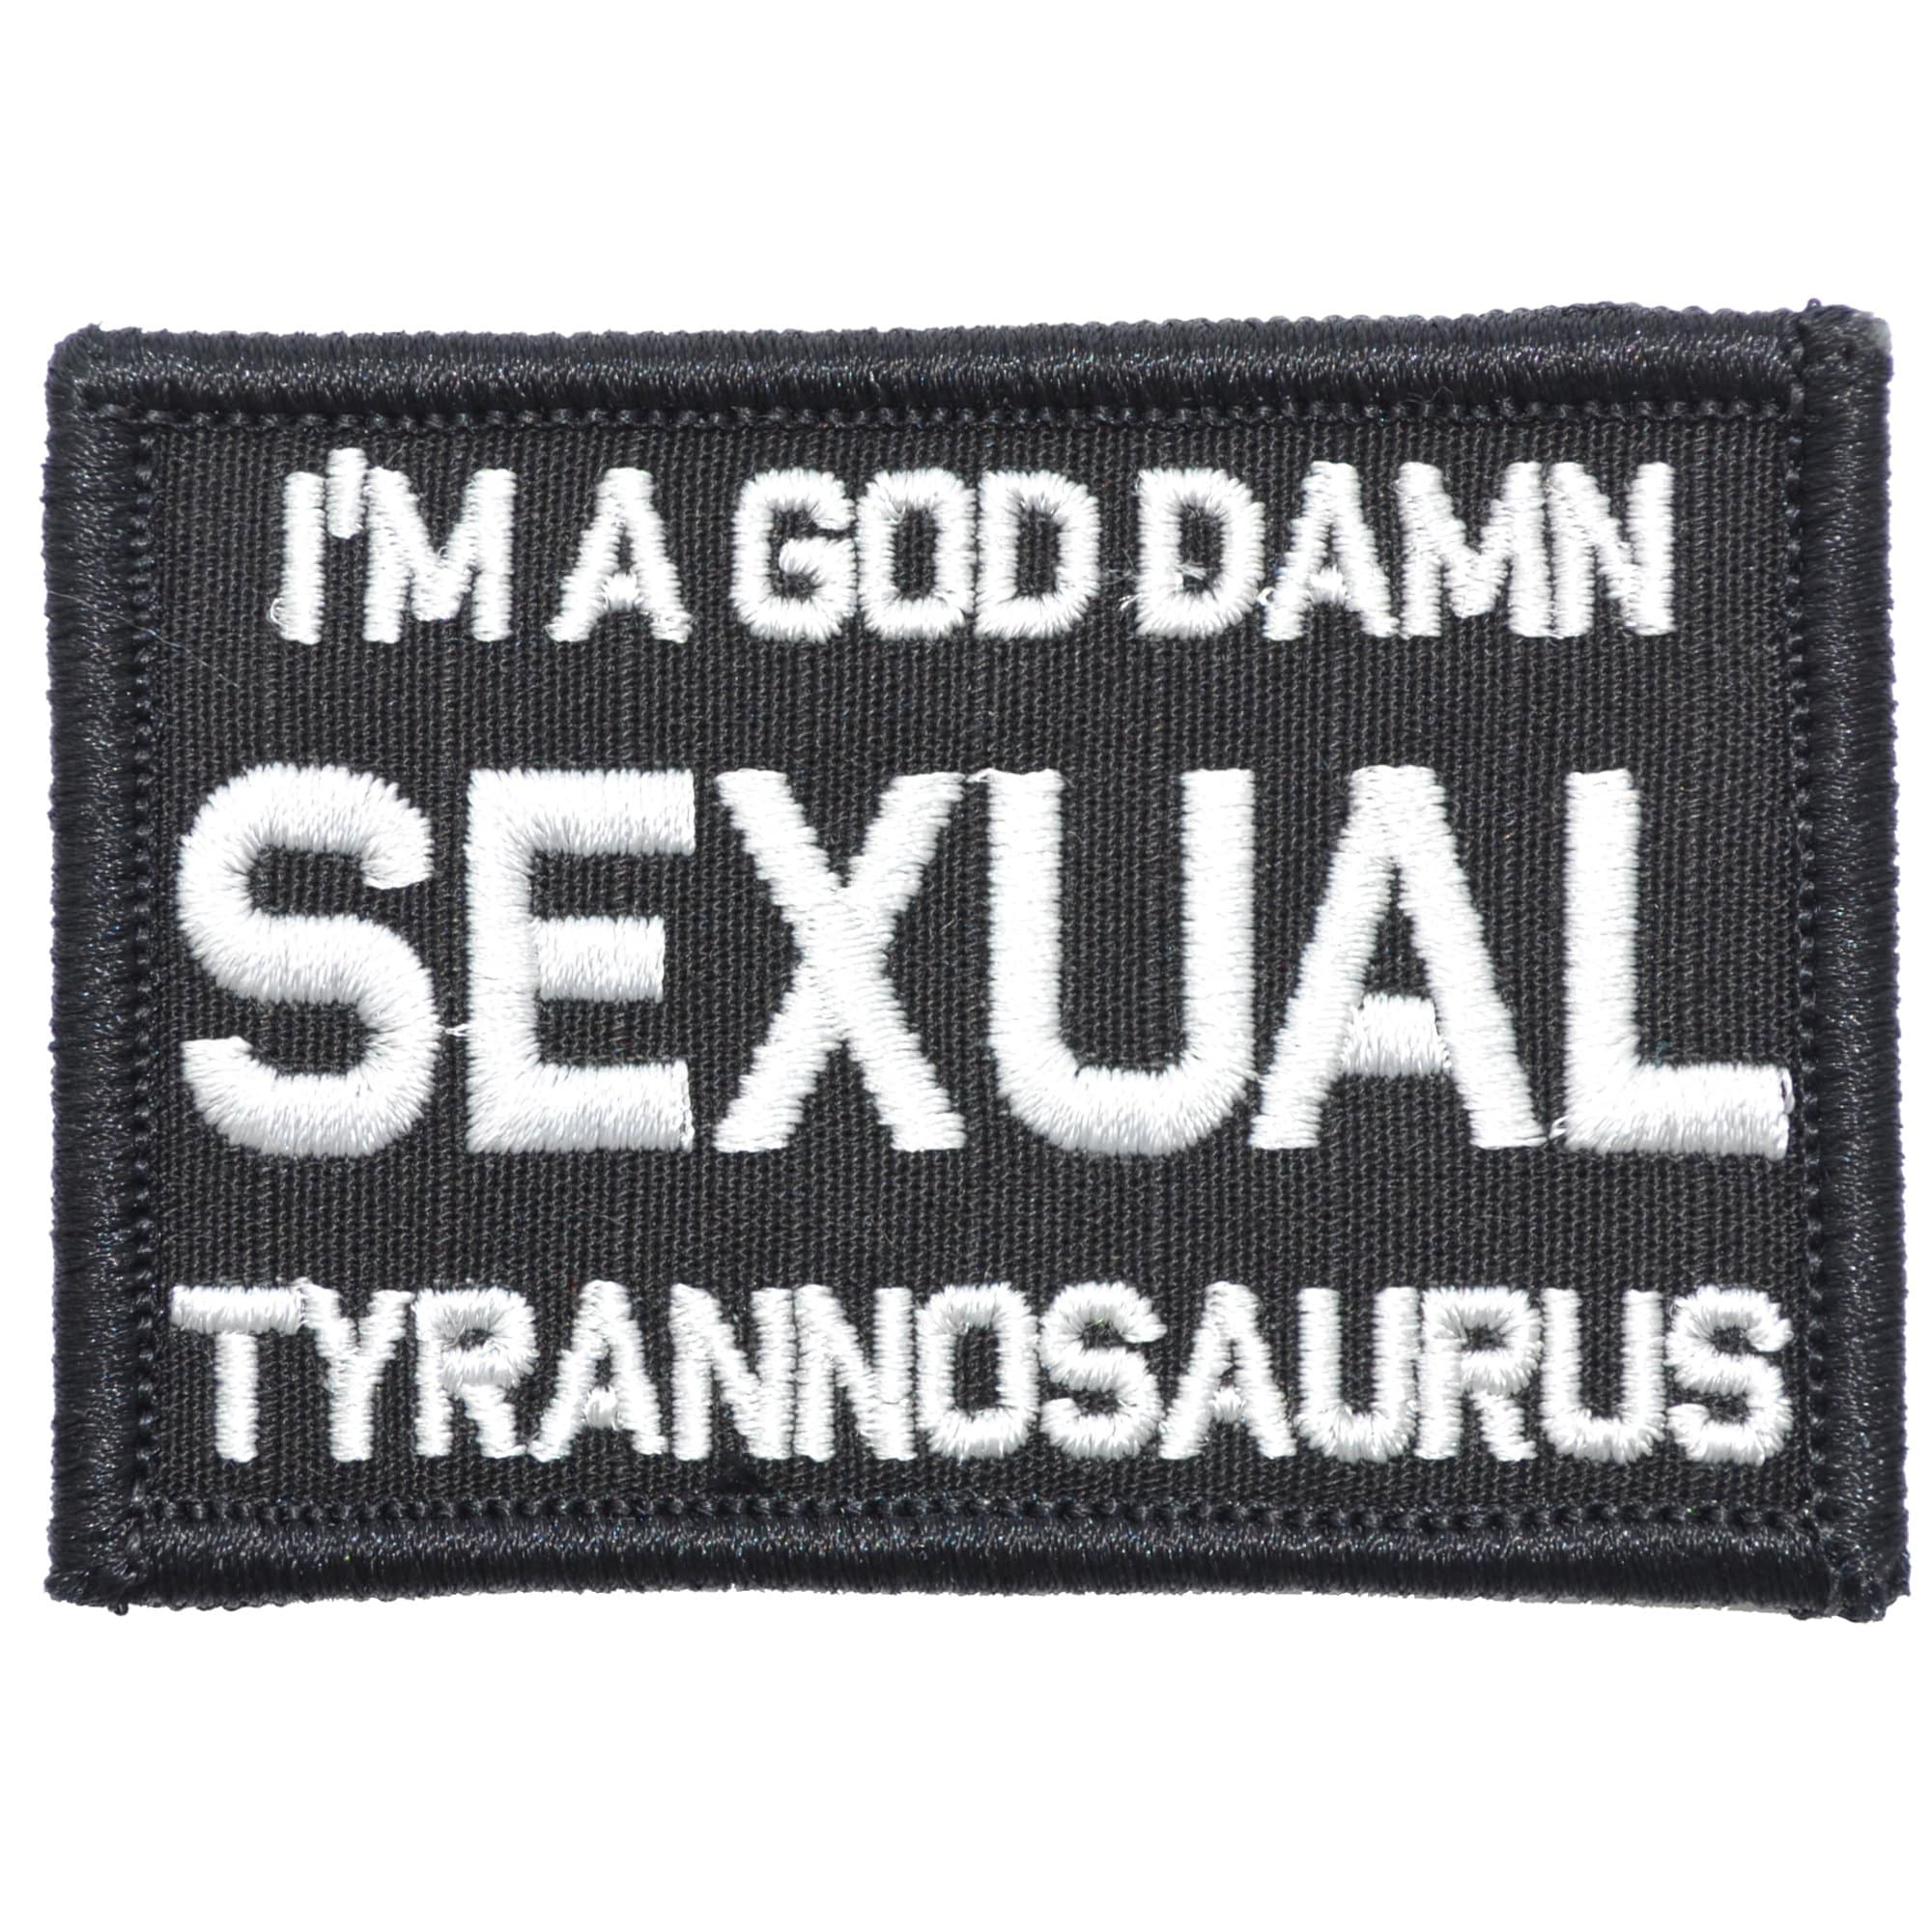 Tactical Gear Junkie Patches Black I'm a God Damn Sexual Tyrannosaurus - 2x3 Patch